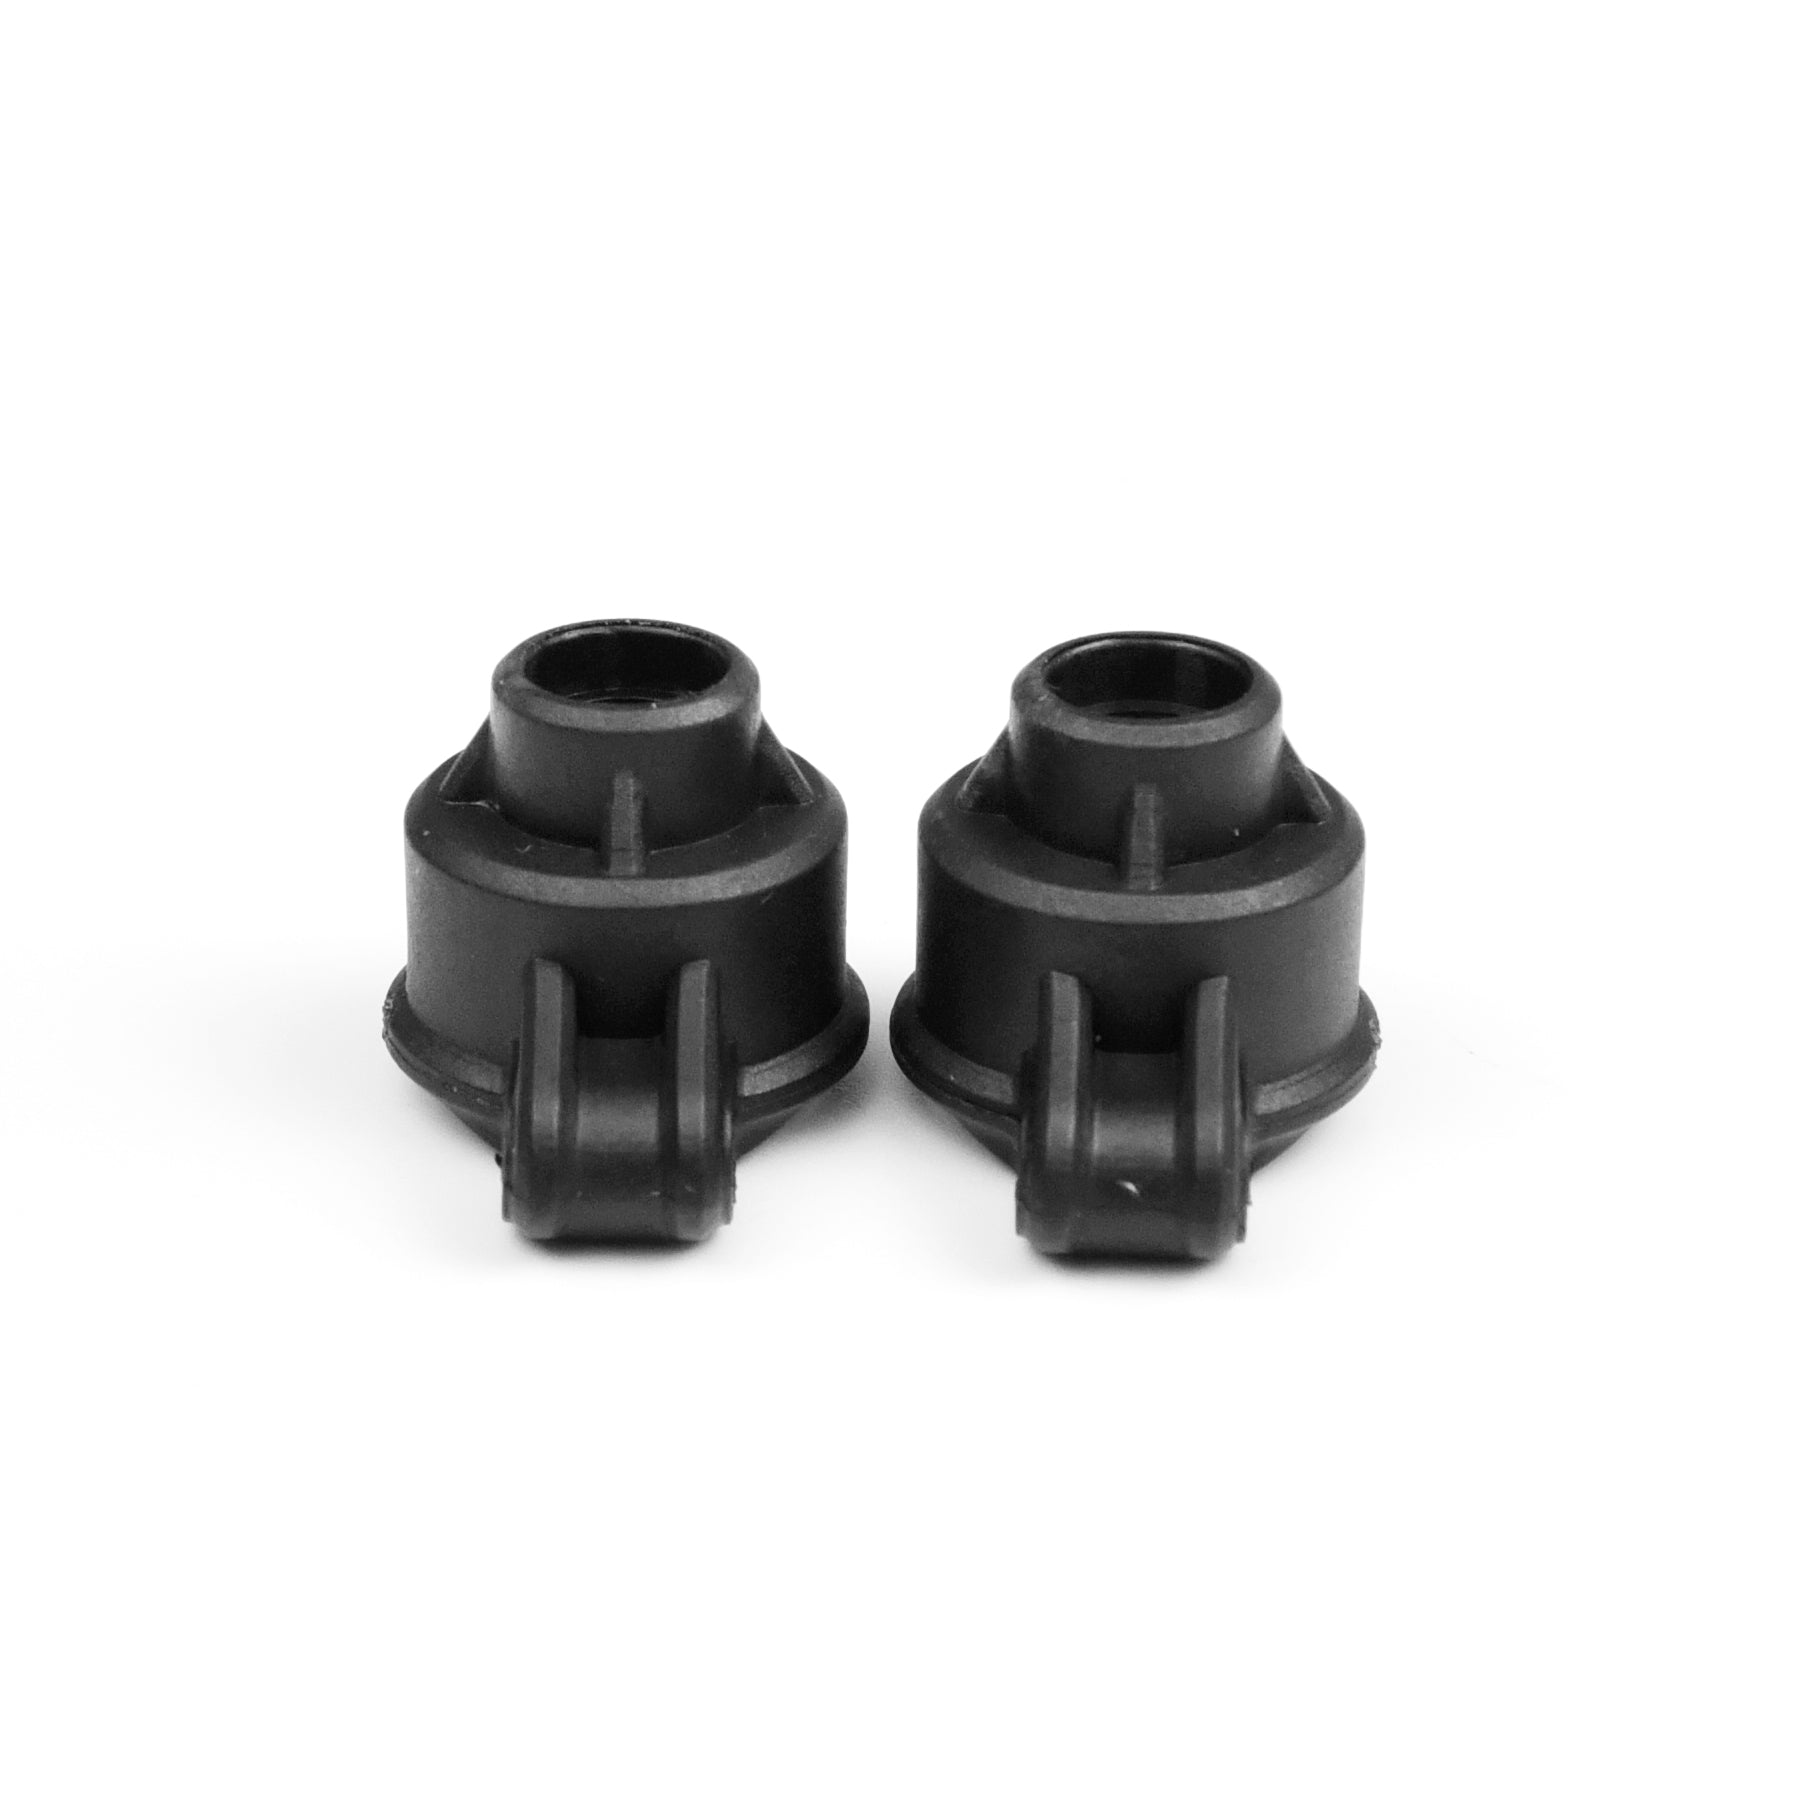 Hosim X06 RC Car Rear Universal Joint X12010 Accessory Spare Parts for 1:10 X06 RC Car